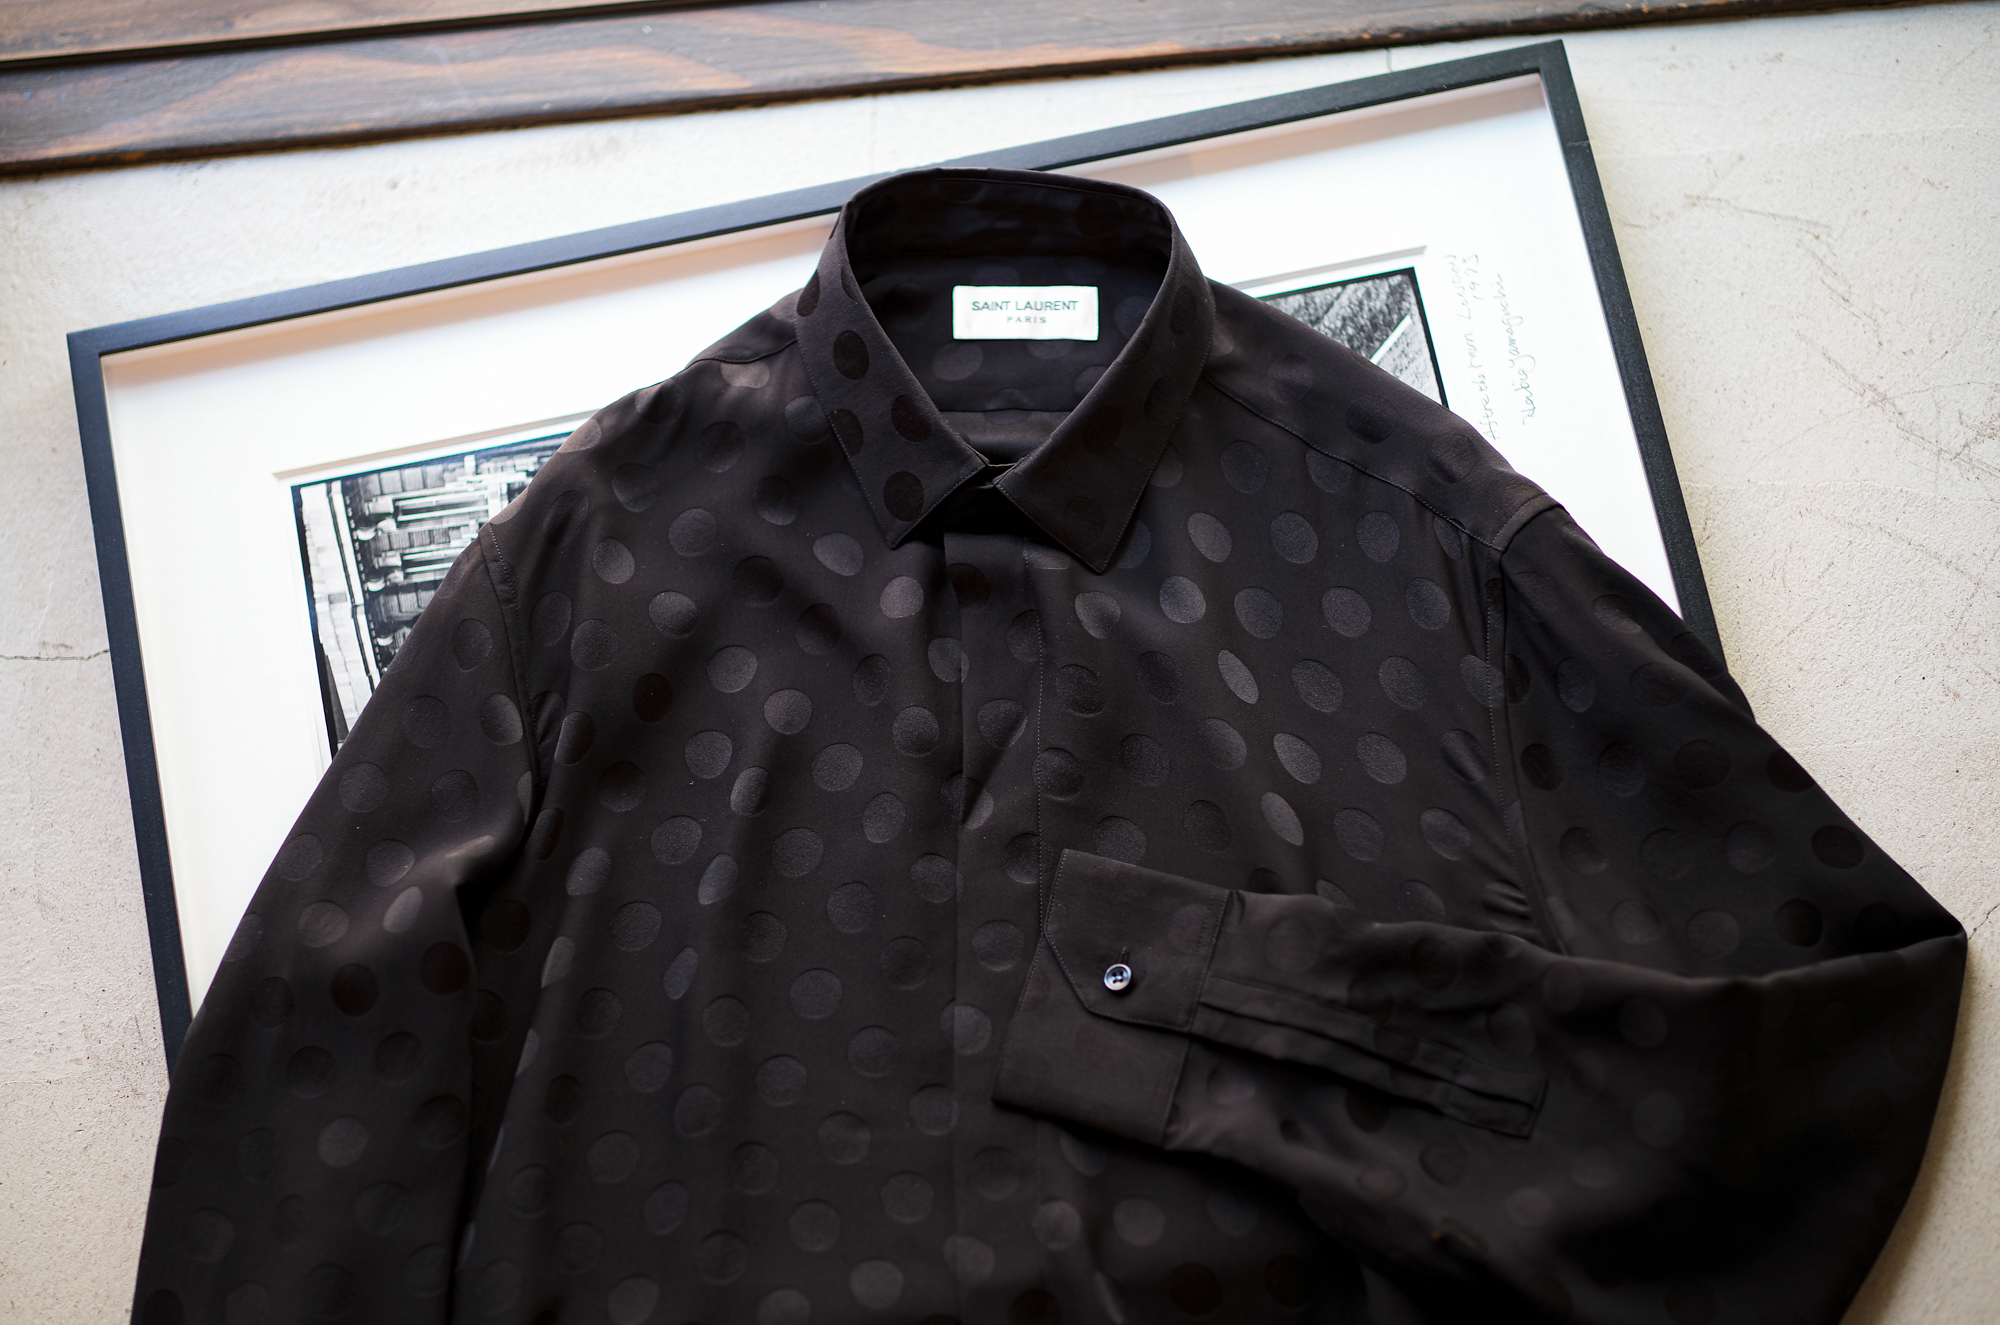 SAINT LAURENT (サンローラン) SHIRT IN DOTTED SHINY AND MATTE SILK ...